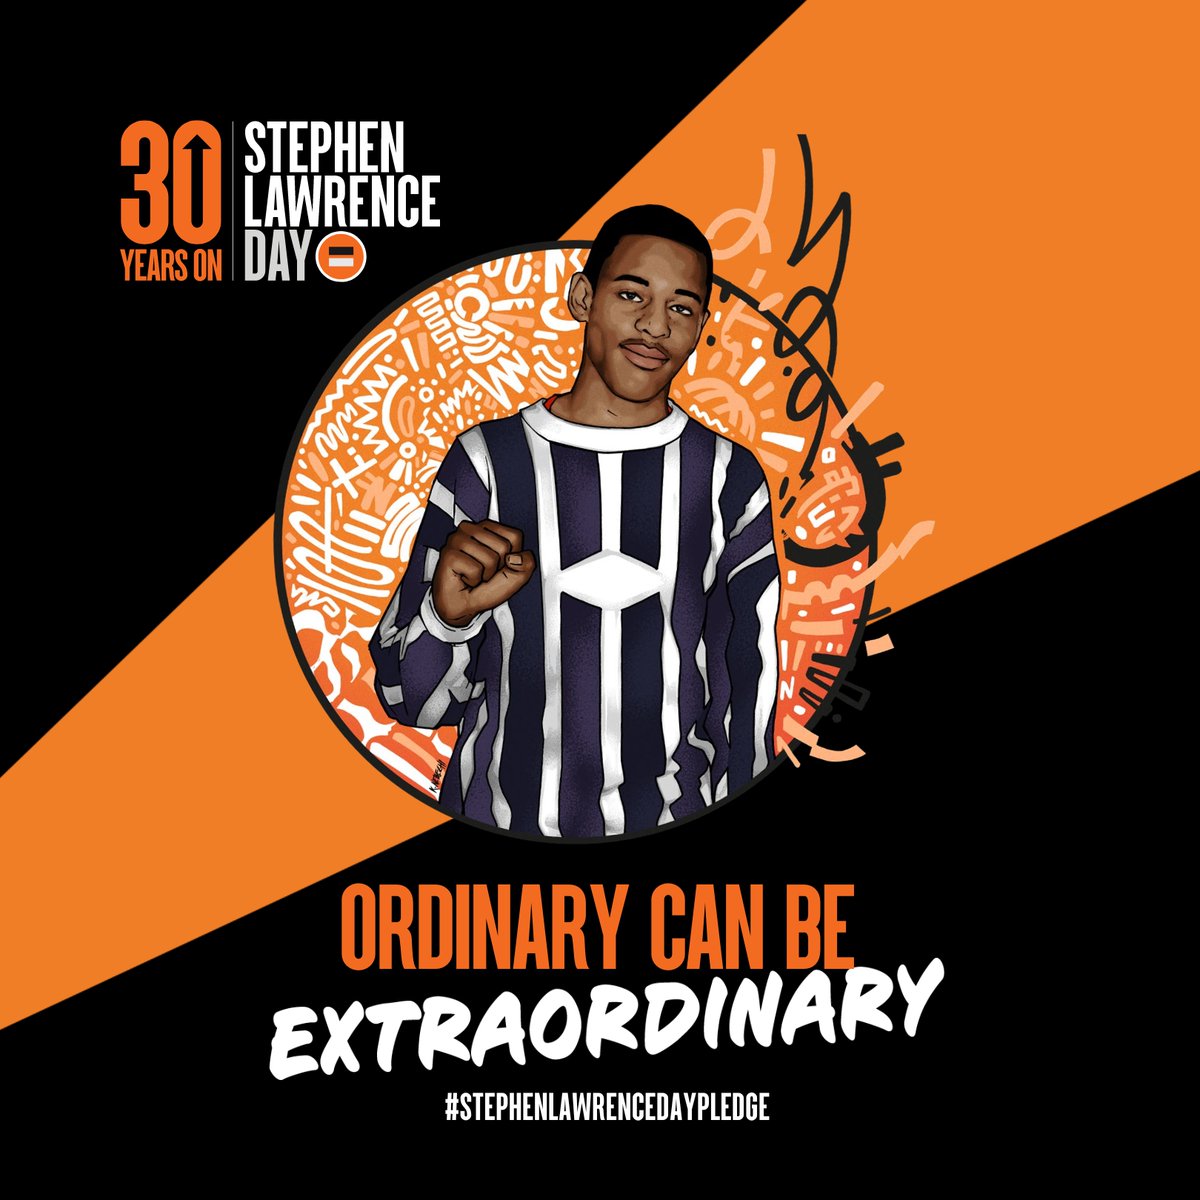 We are making the #StephenLawrenceDayPledge as we fight for economic, legal, social and political equity for Black communities in Britain in order to ensure equal opportunity for progress and prosperity. 

Share your #StephenLawrenceDayPledges below 👇